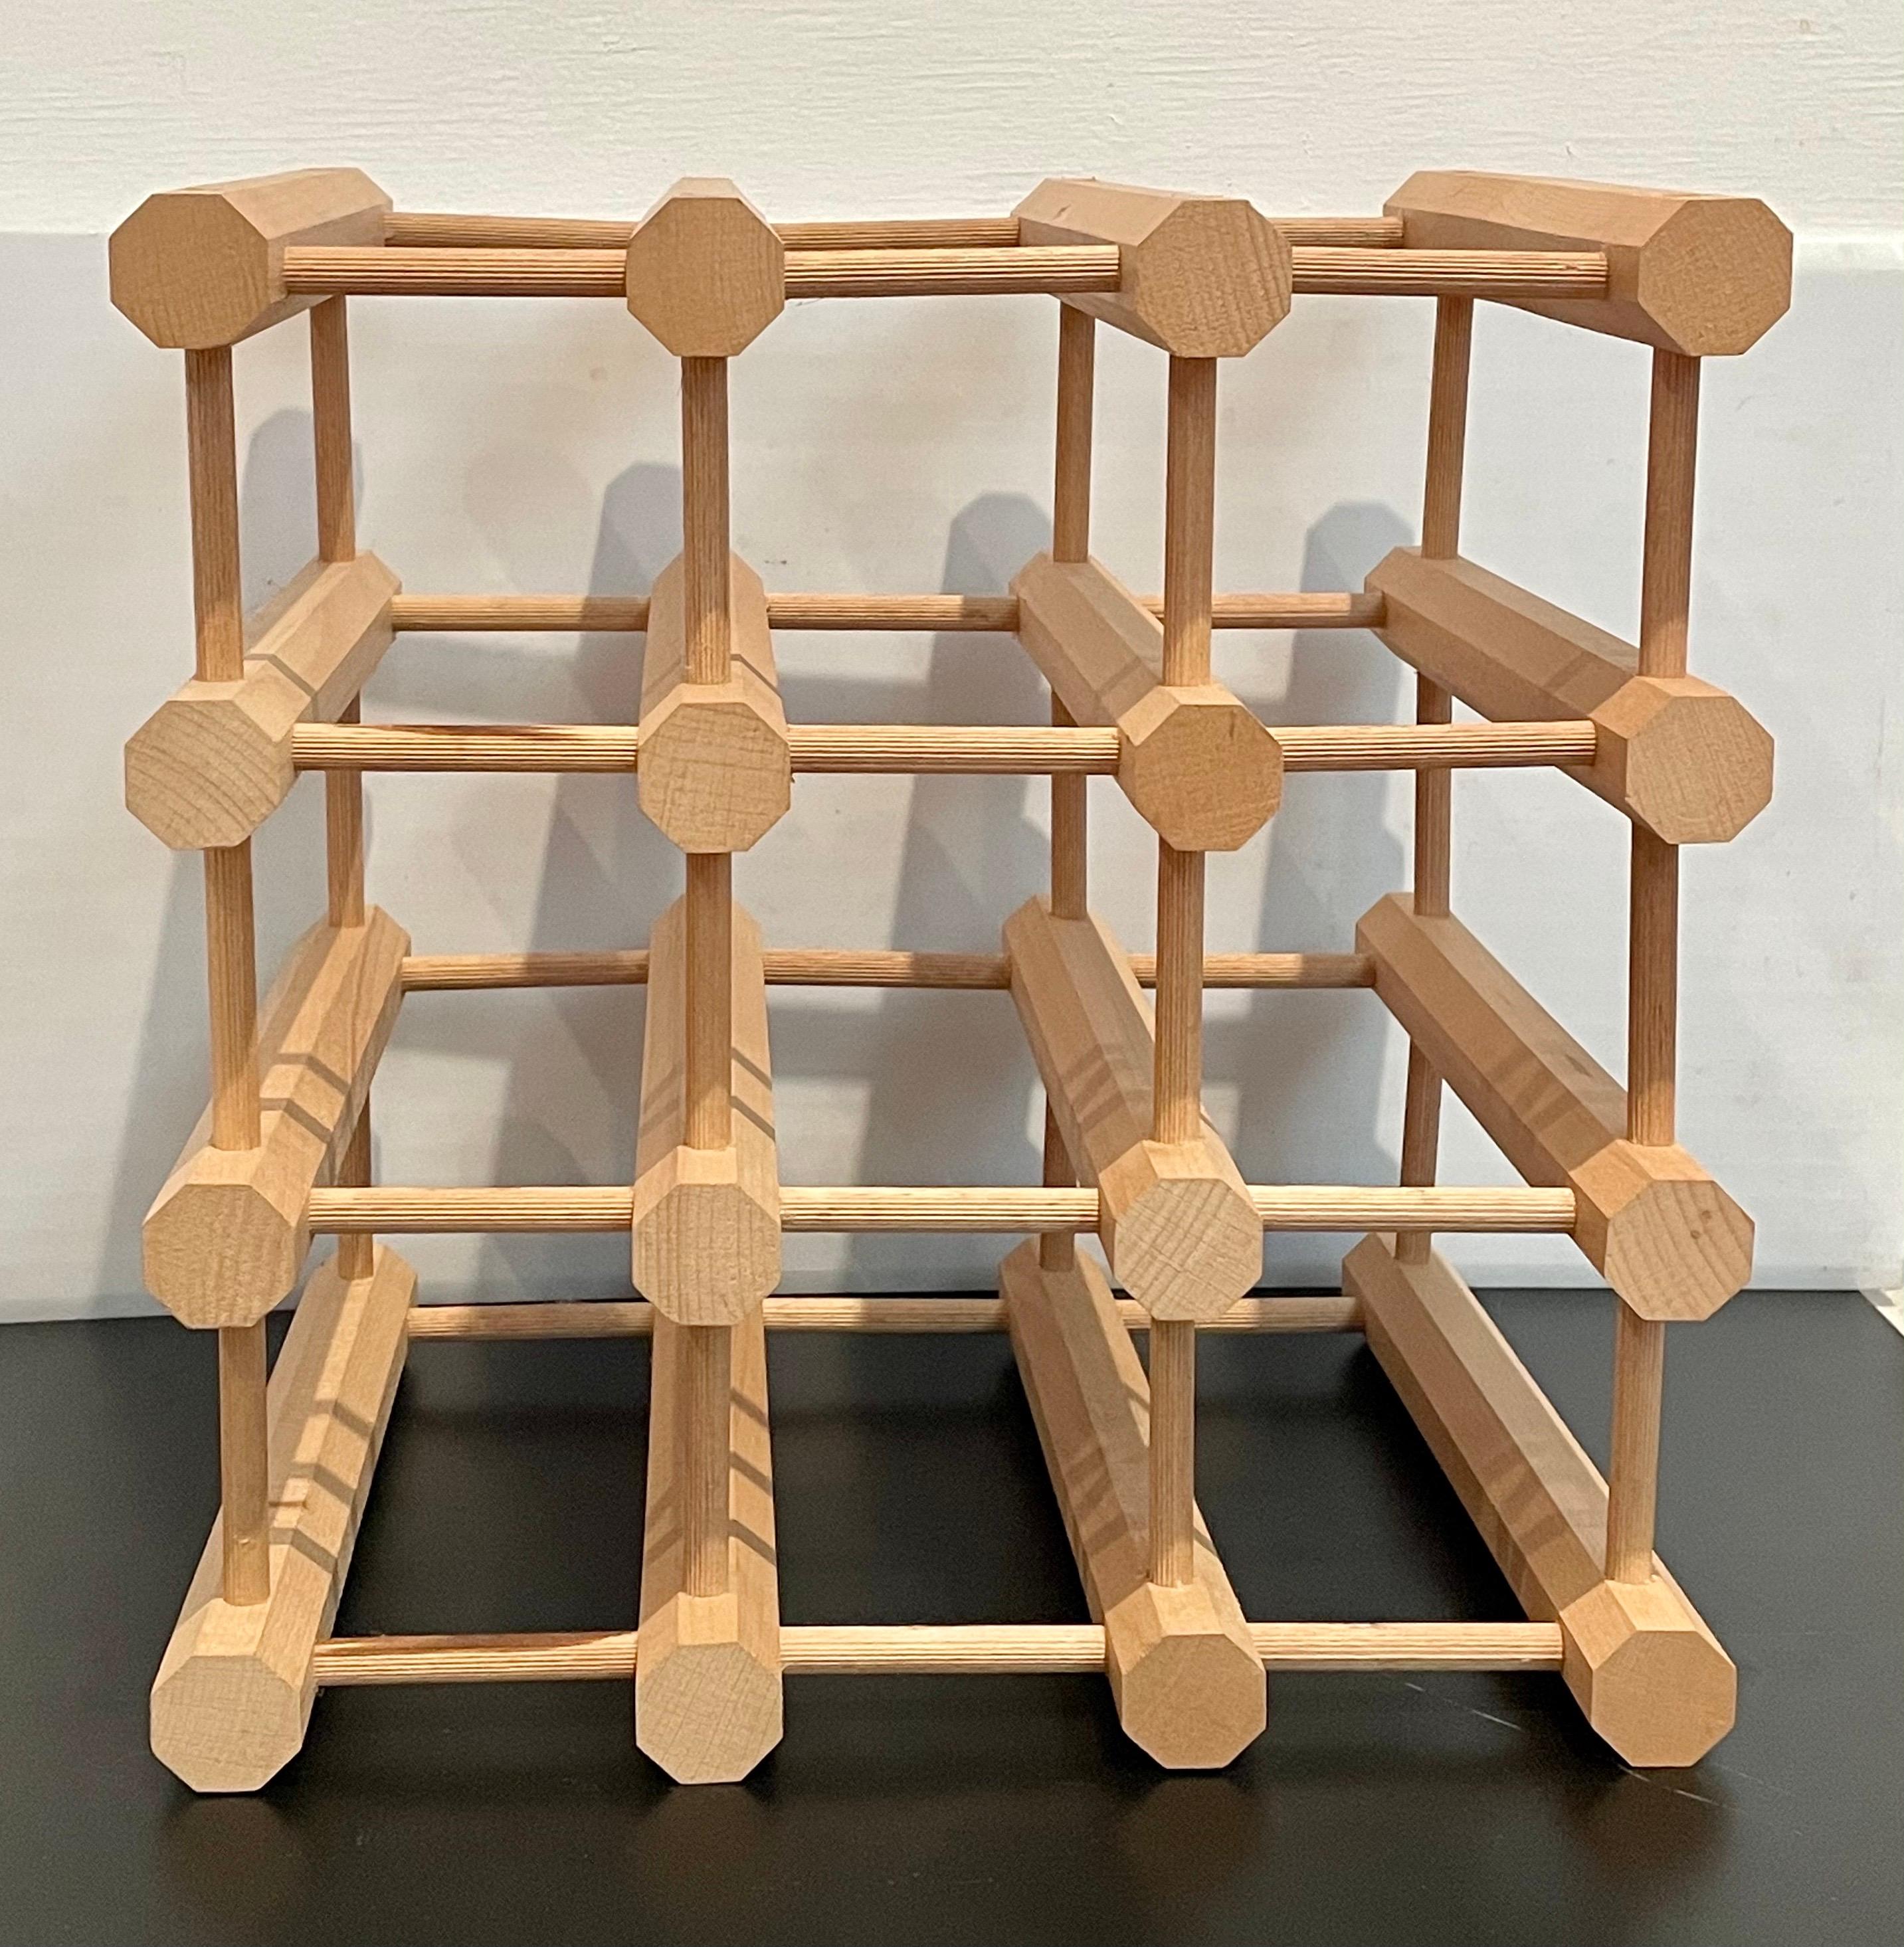 Versatile solid birch 12 bottle wine rack by Nissen Langaa, circa 1980s with nine bottles on the bottom and three on top perfect for a small place.